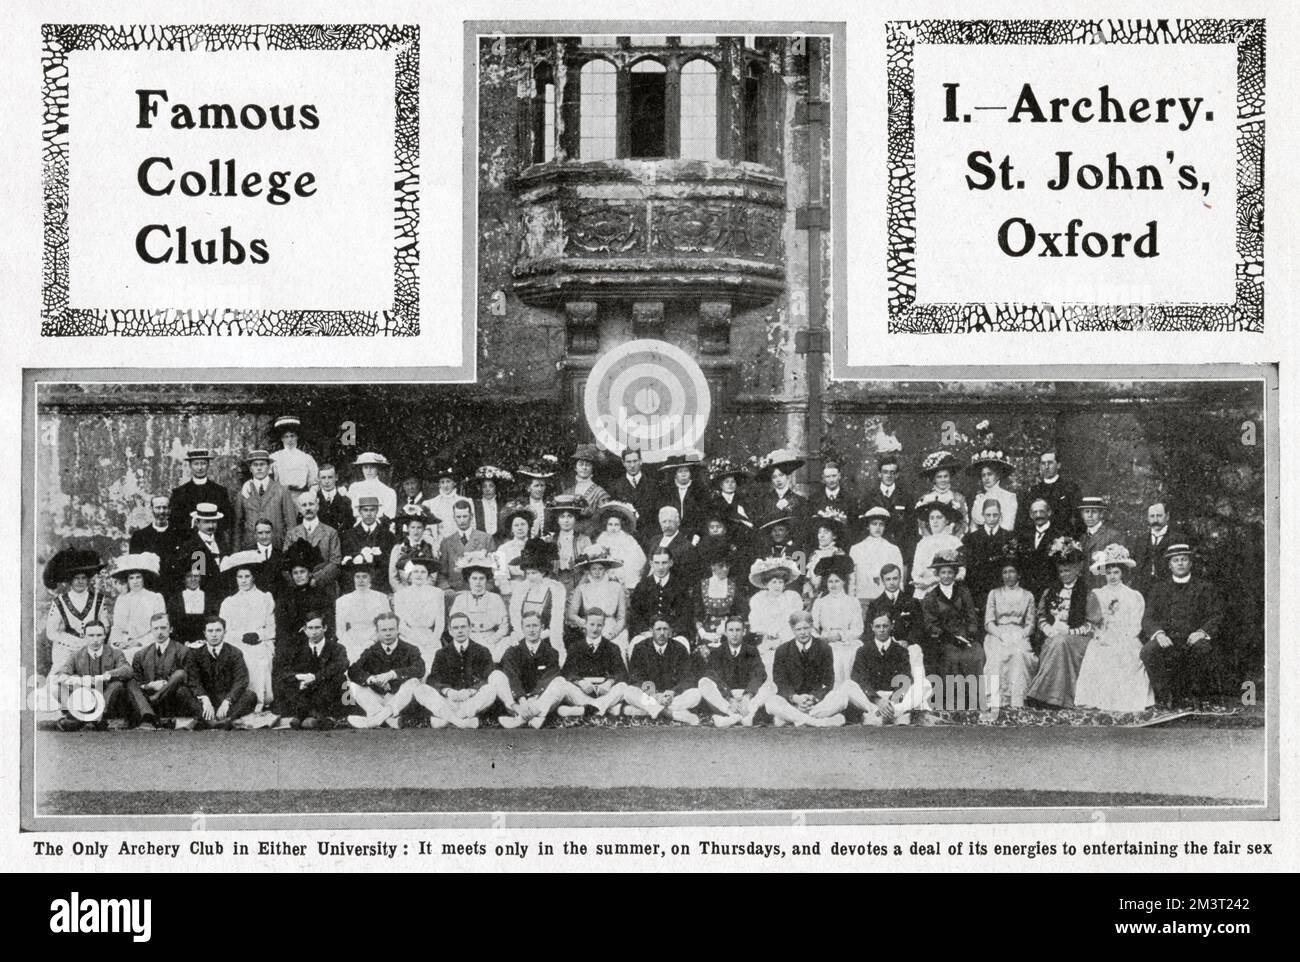 Group photograph of the male and femlae members of the Archery Club, St. John's Collge, Oxford University. The sole archery club at either of the top two English Universities at the time. Stock Photo